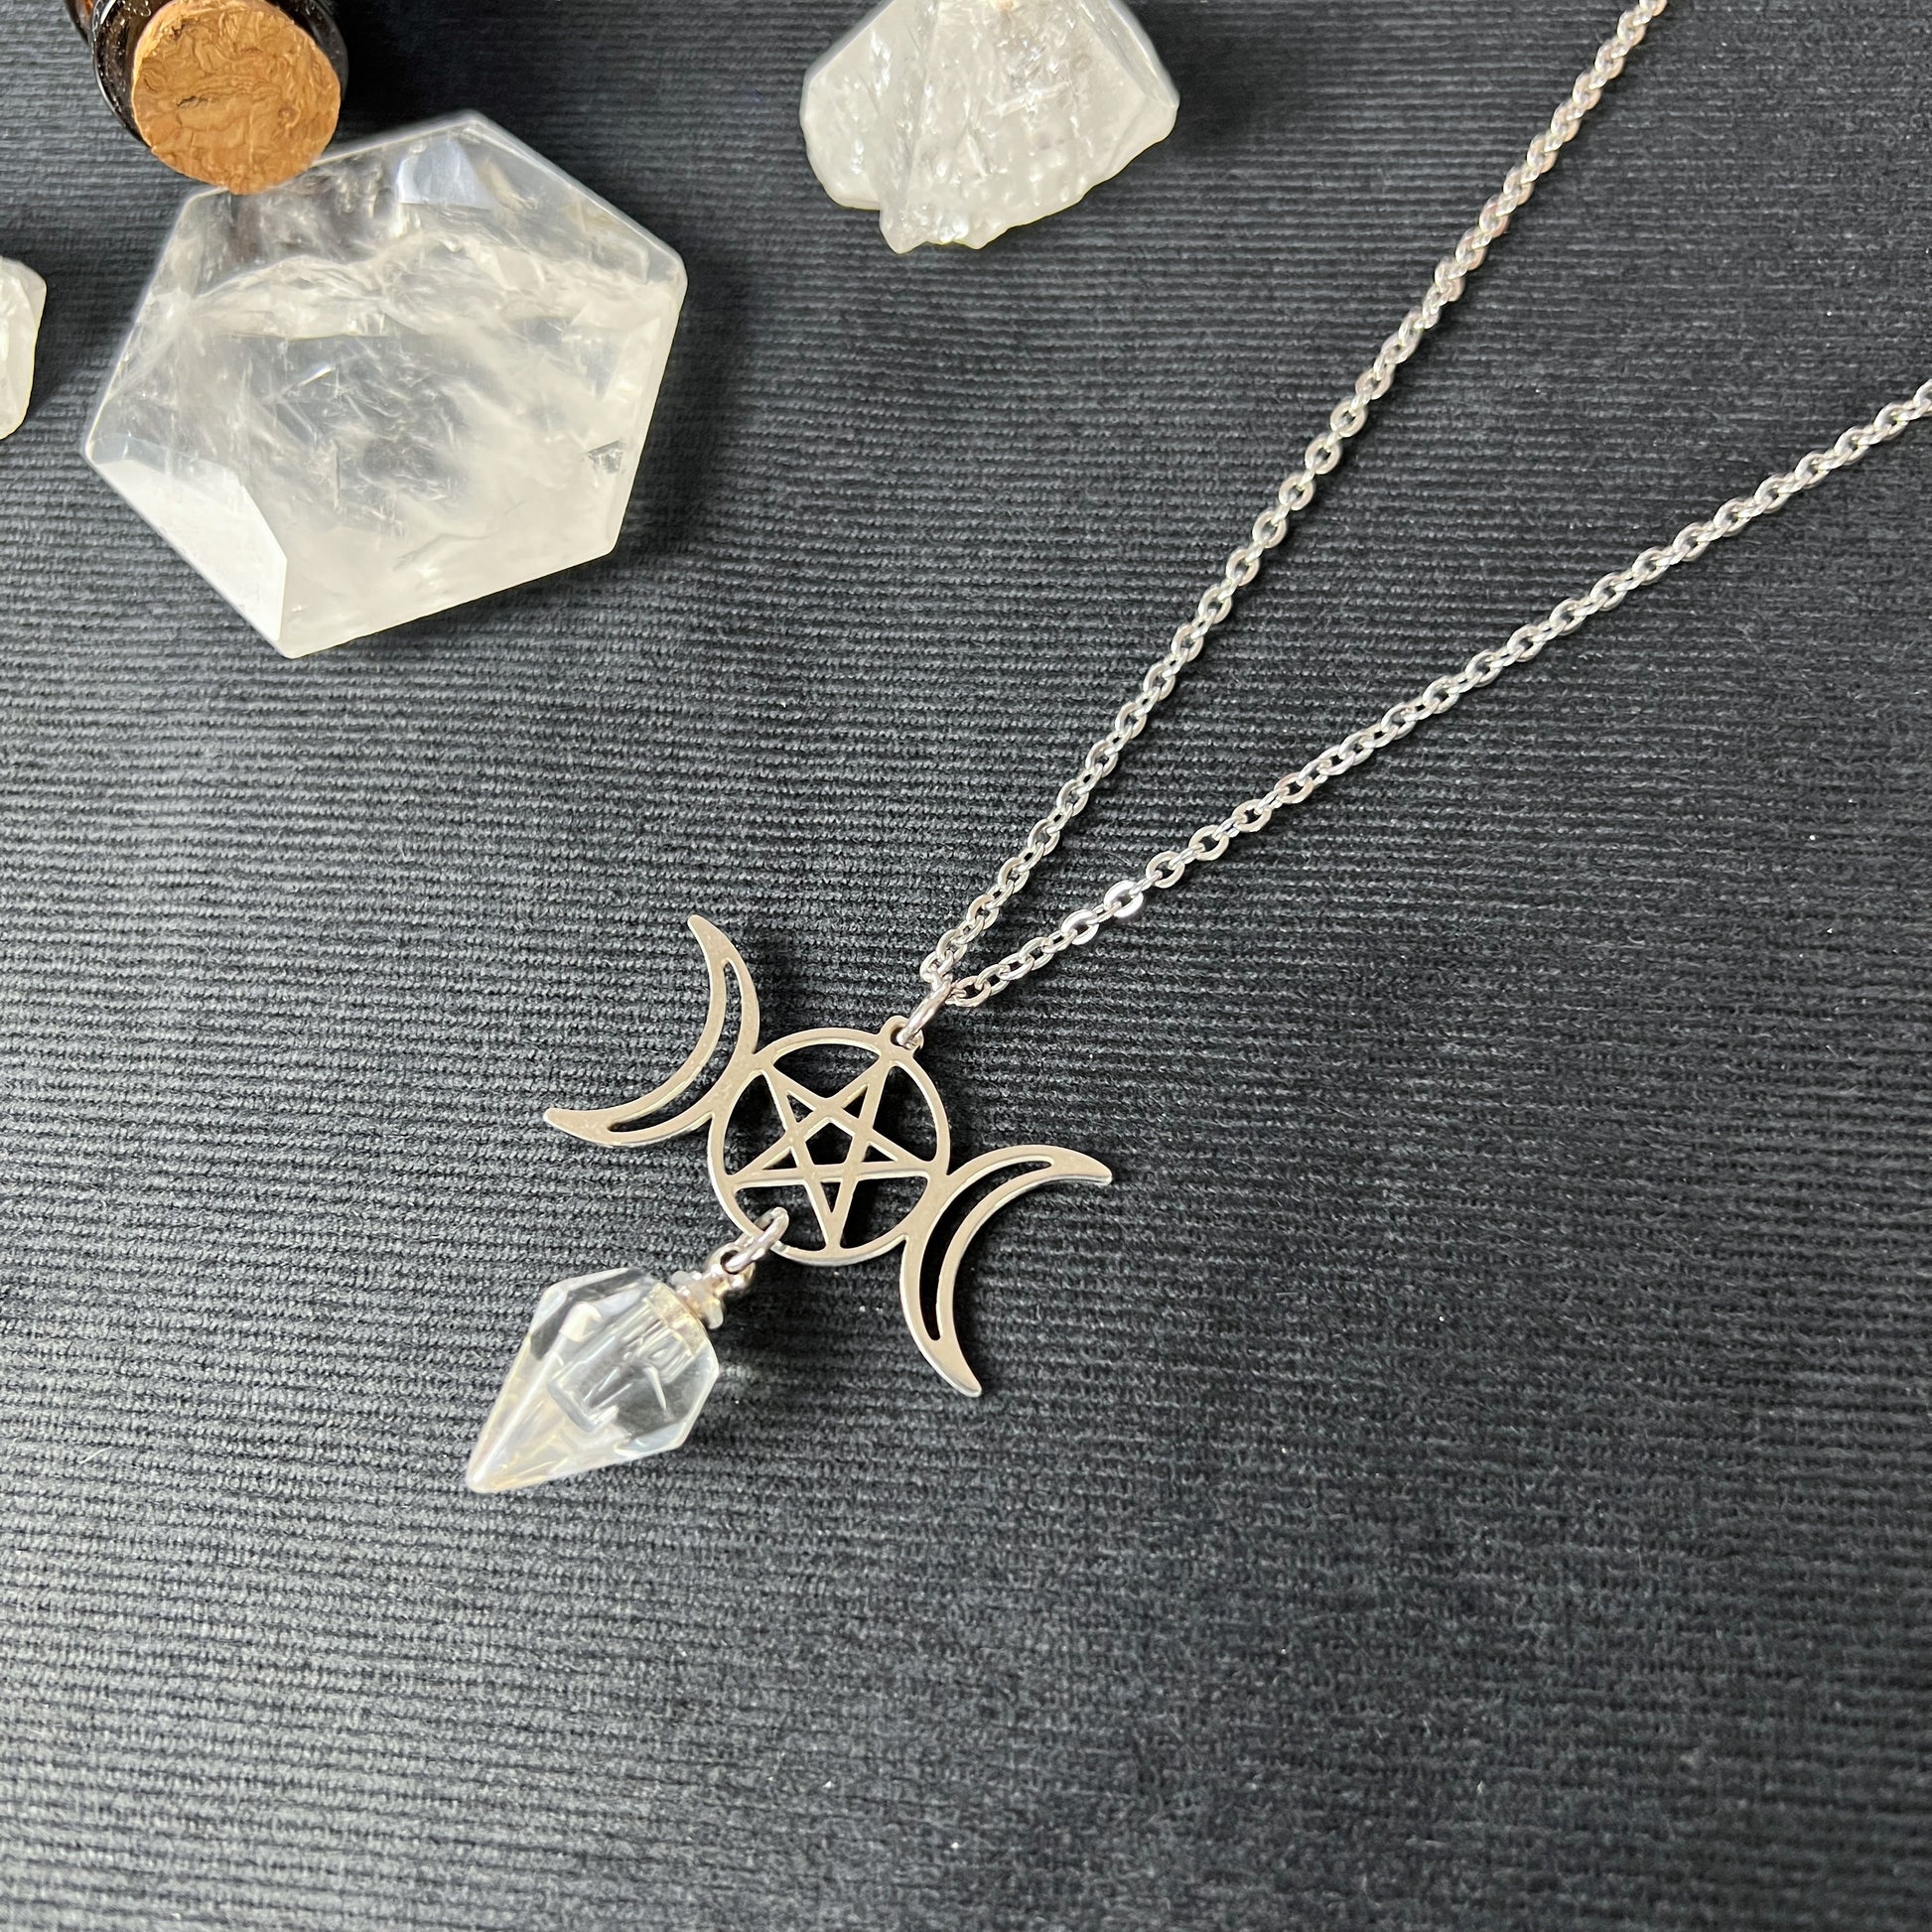 Triple Moon and pentacle potion necklace made of stainless steel Baguette Magick